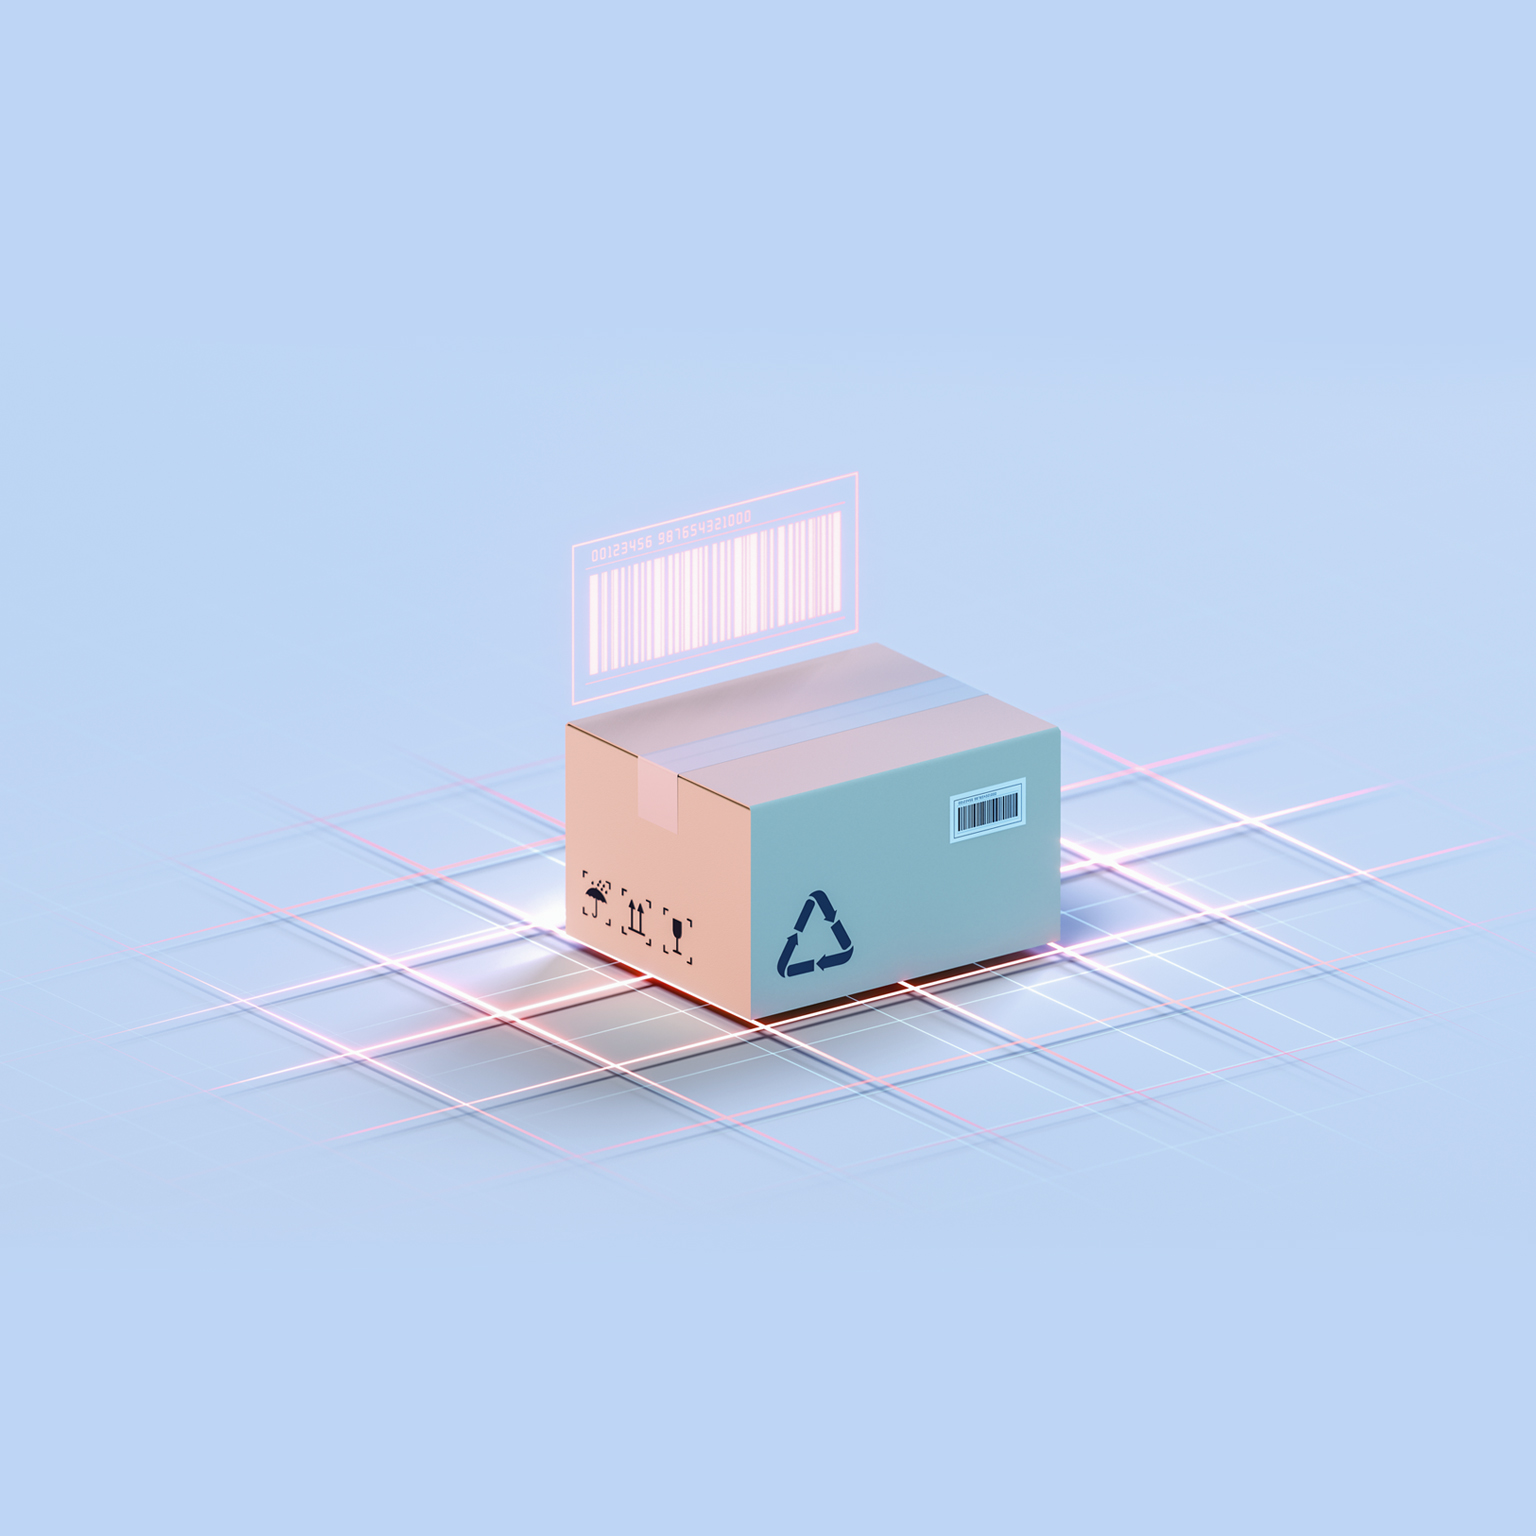 Carton and bar code, commodity inspection and transportation, 3D rendering